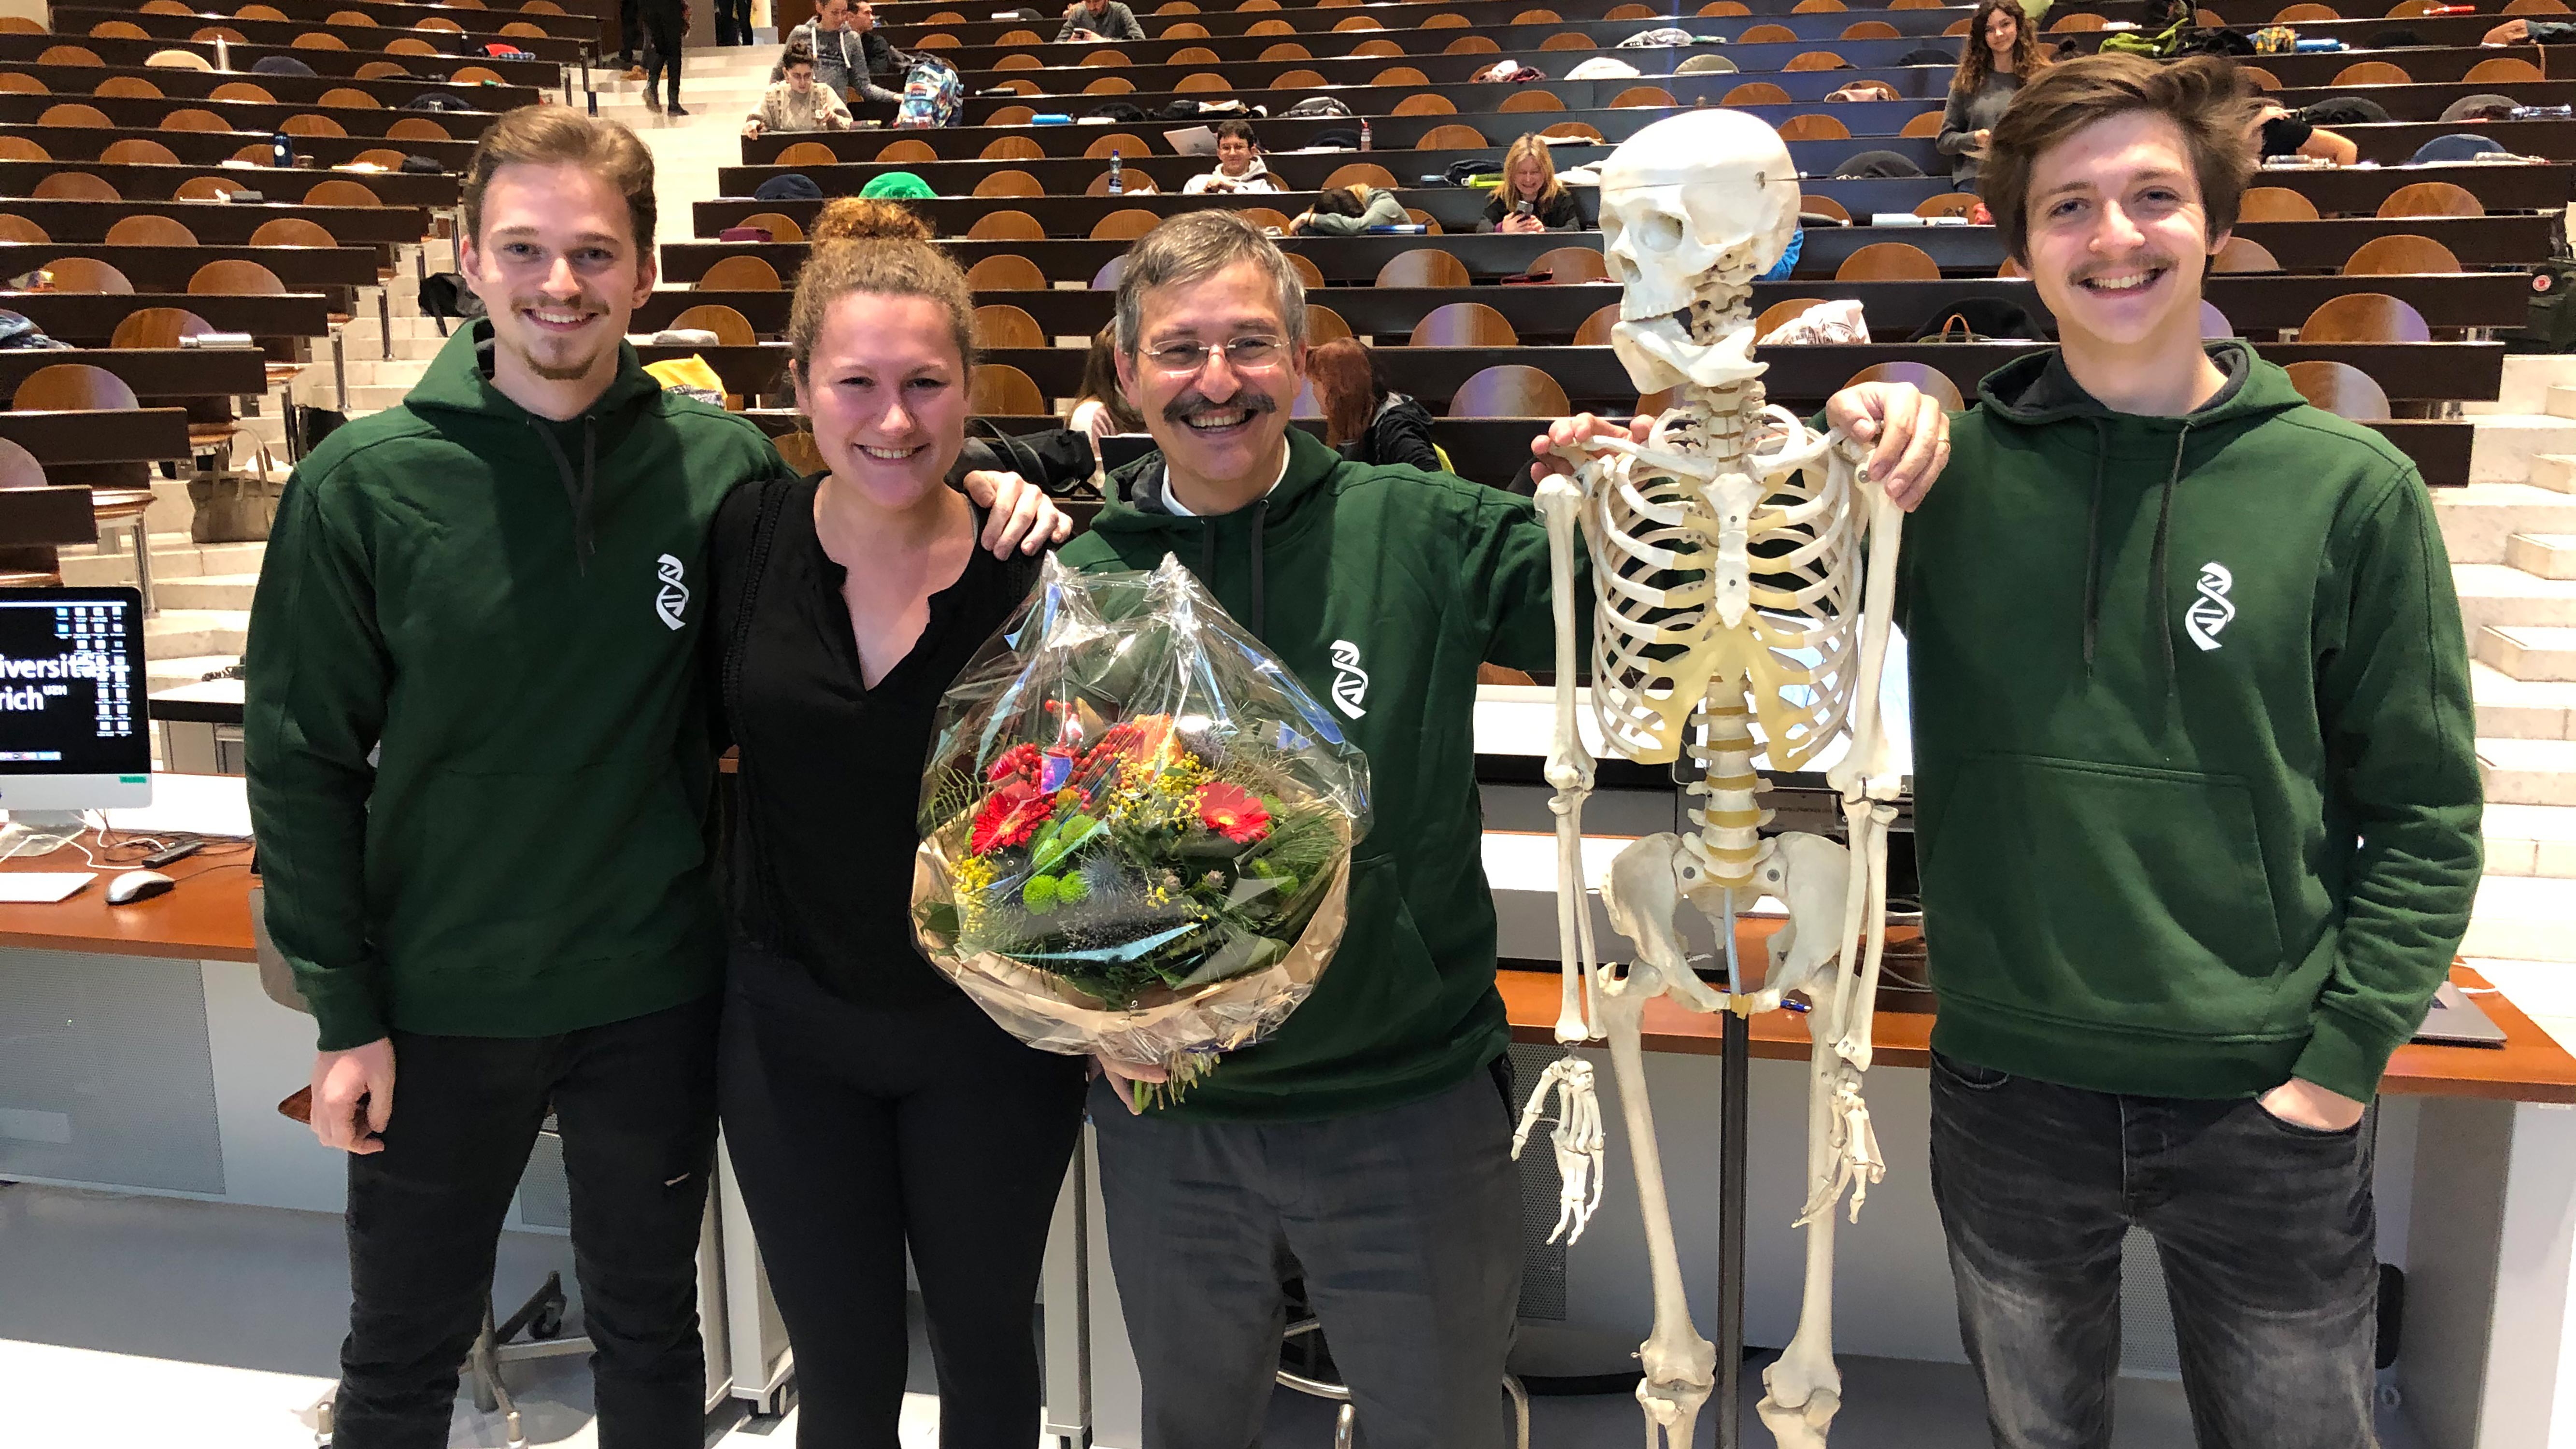 Michael Hengartner with some of his students following his last lecture in December 2019. His molecular biology lectures were very popular, with plenty of humor and entertainment thrown in. In 2010 he was granted the UZH Teaching Award.